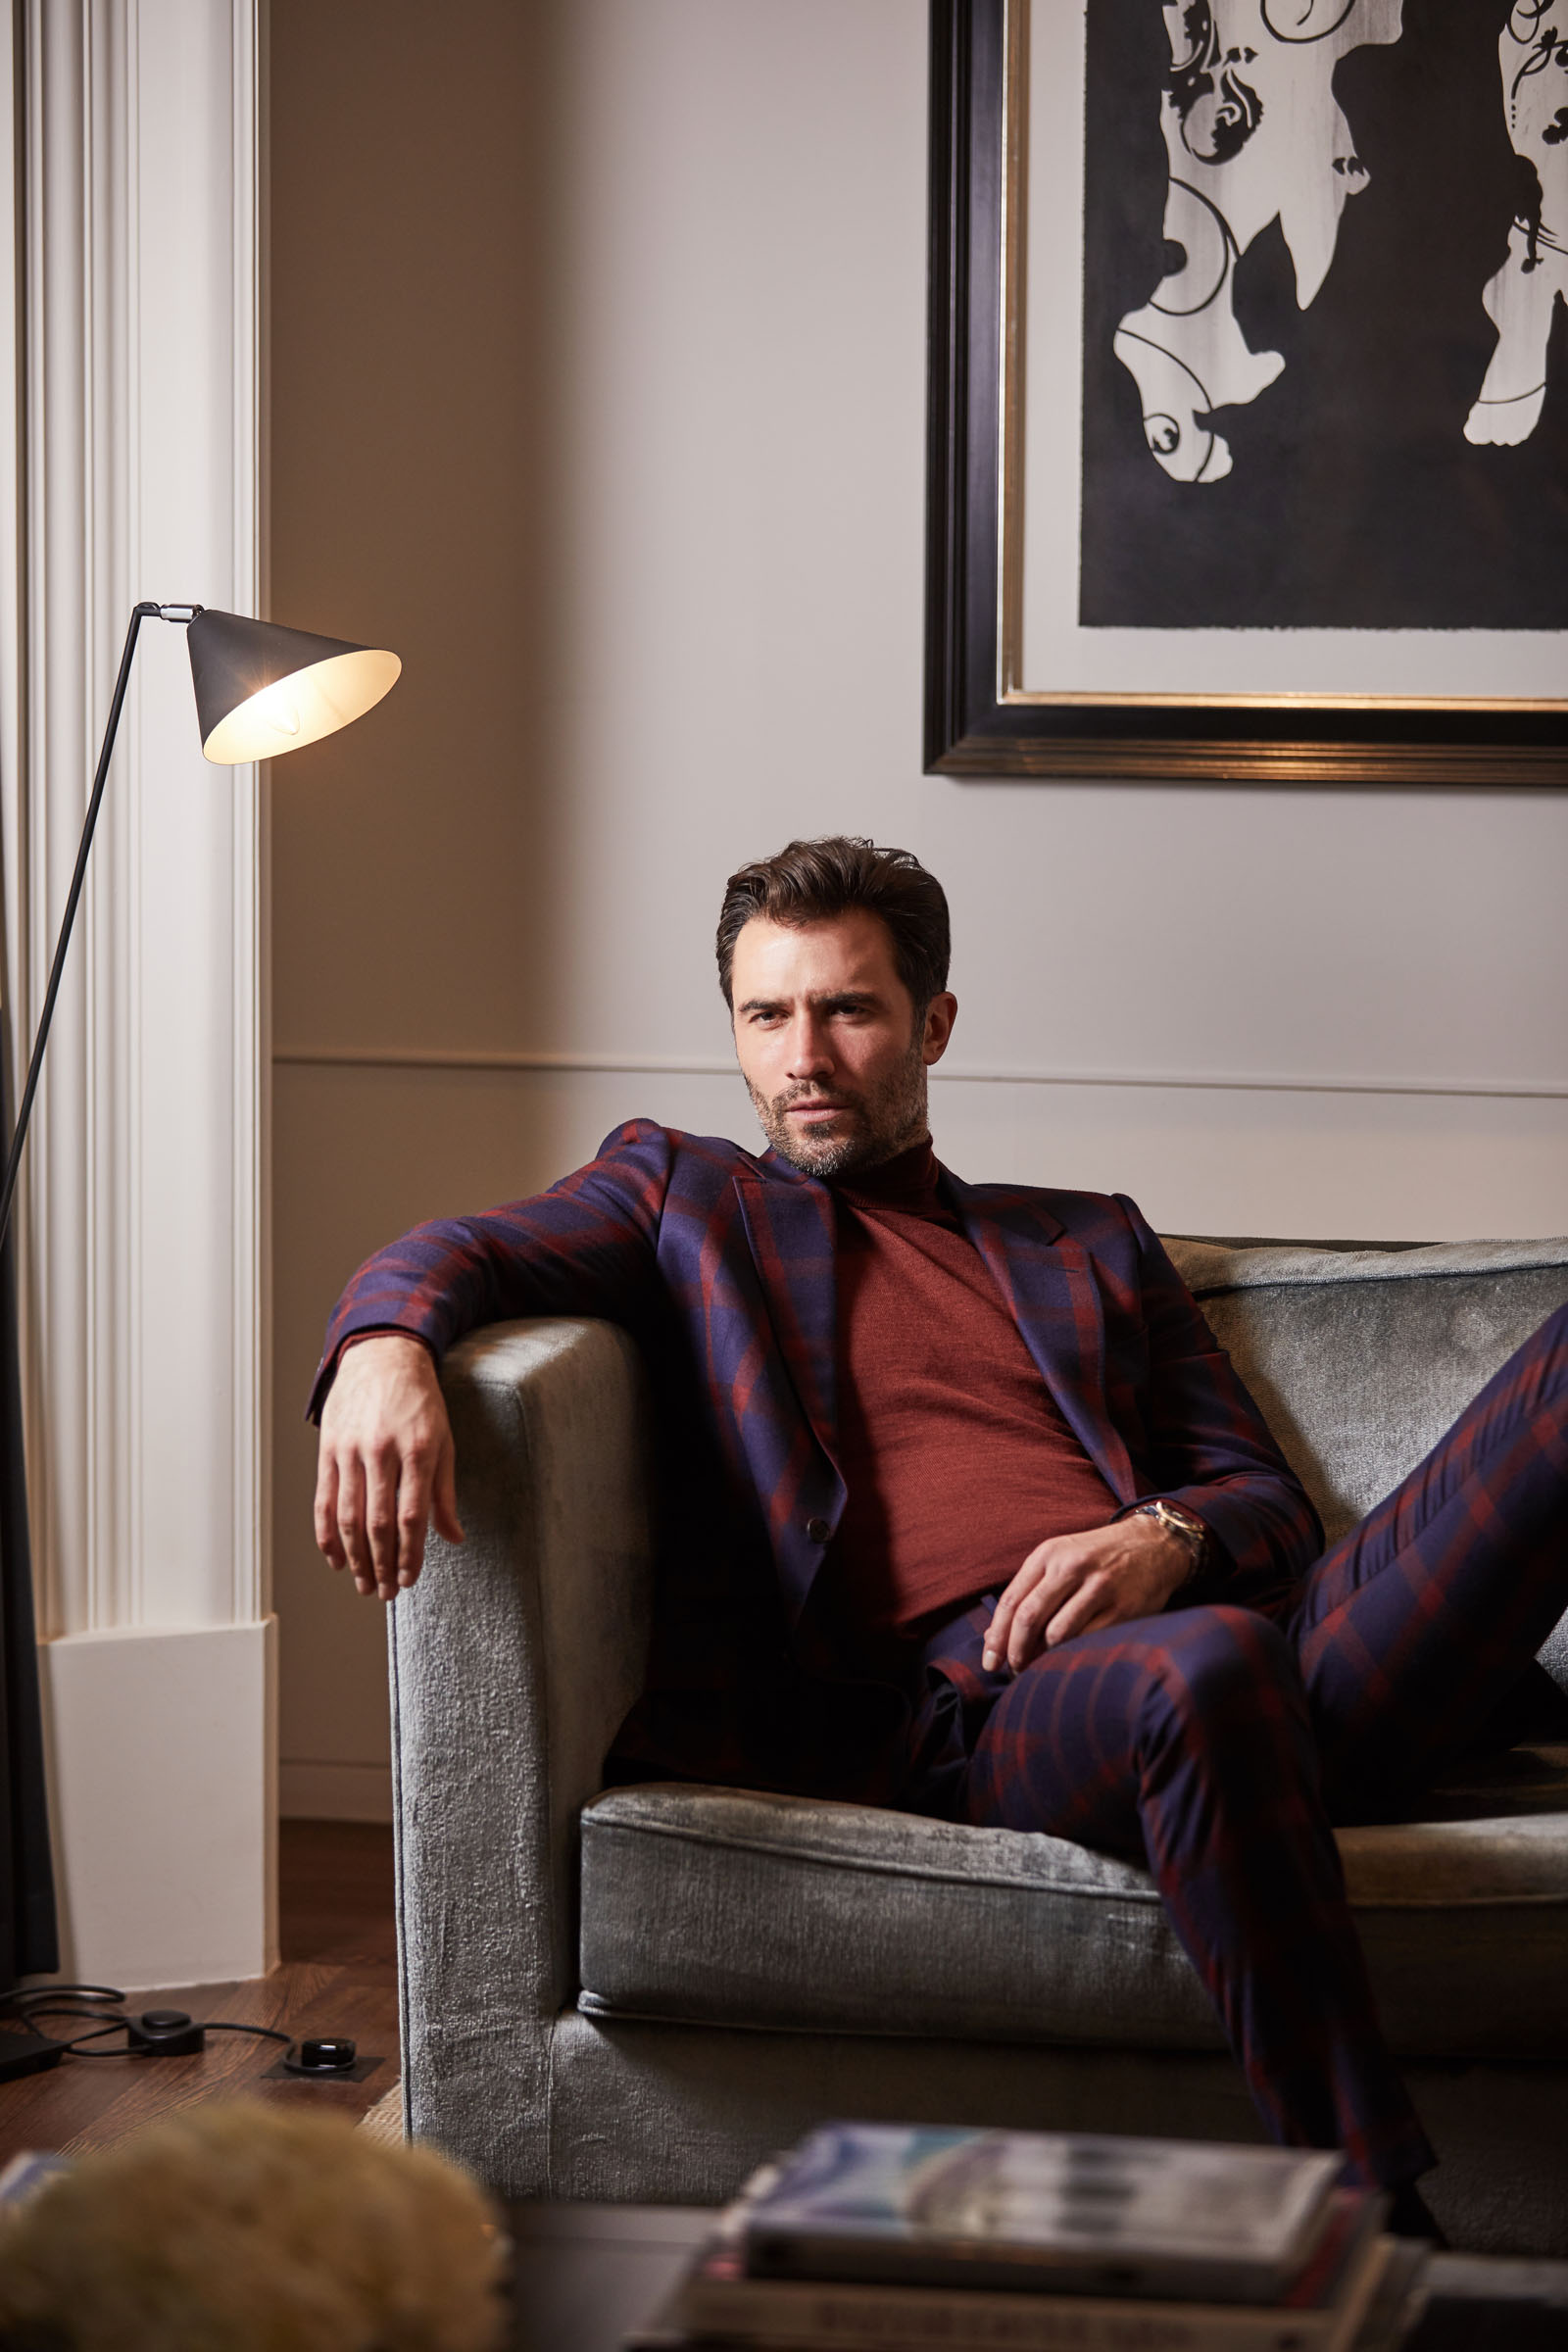 Burgundy and navy windowpane check suit, Gieves & Hawkes